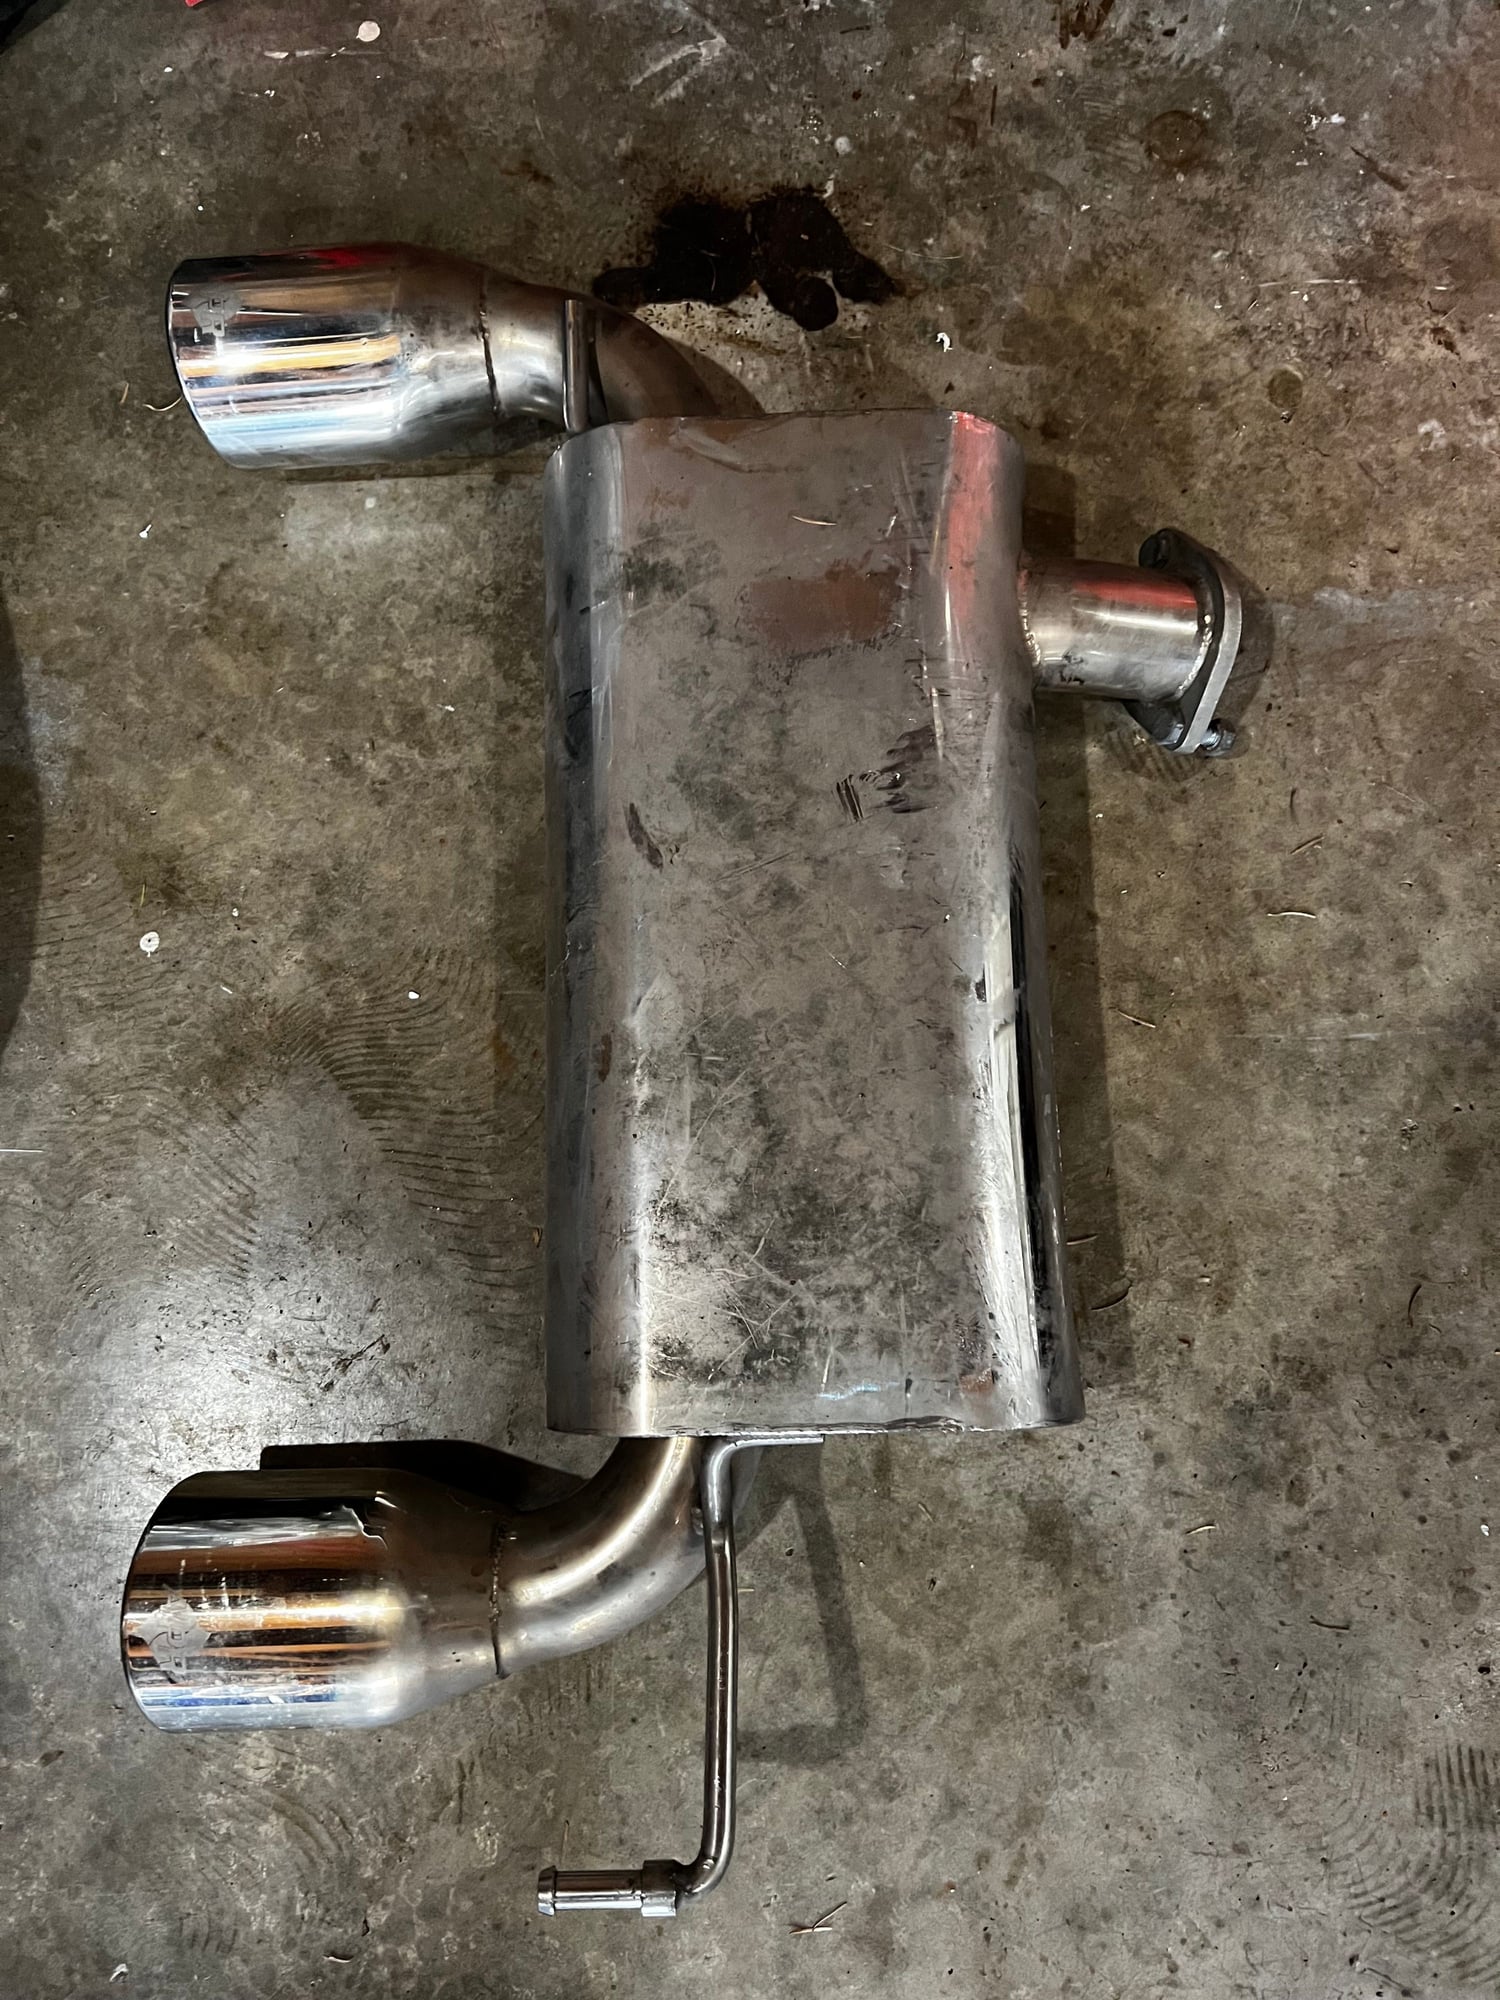 Engine - Exhaust - Audi TT MKI APR exhaust - mufflers only - Used - 2000 to 2006 Audi TT Quattro - Eugene, OR 97405, United States